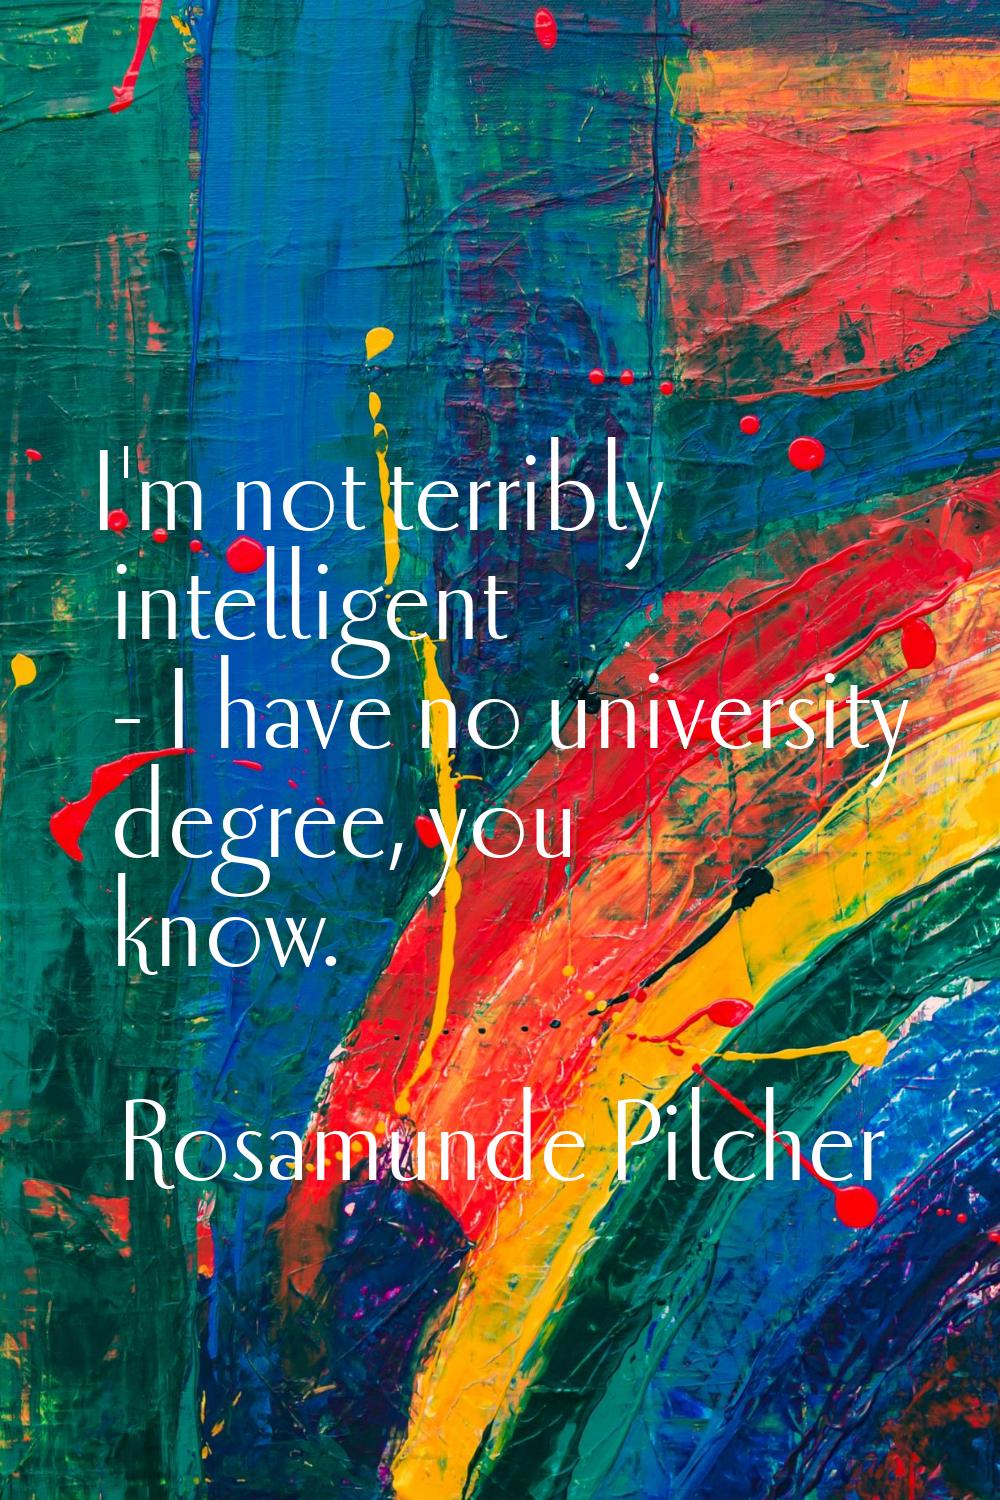 I'm not terribly intelligent - I have no university degree, you know.